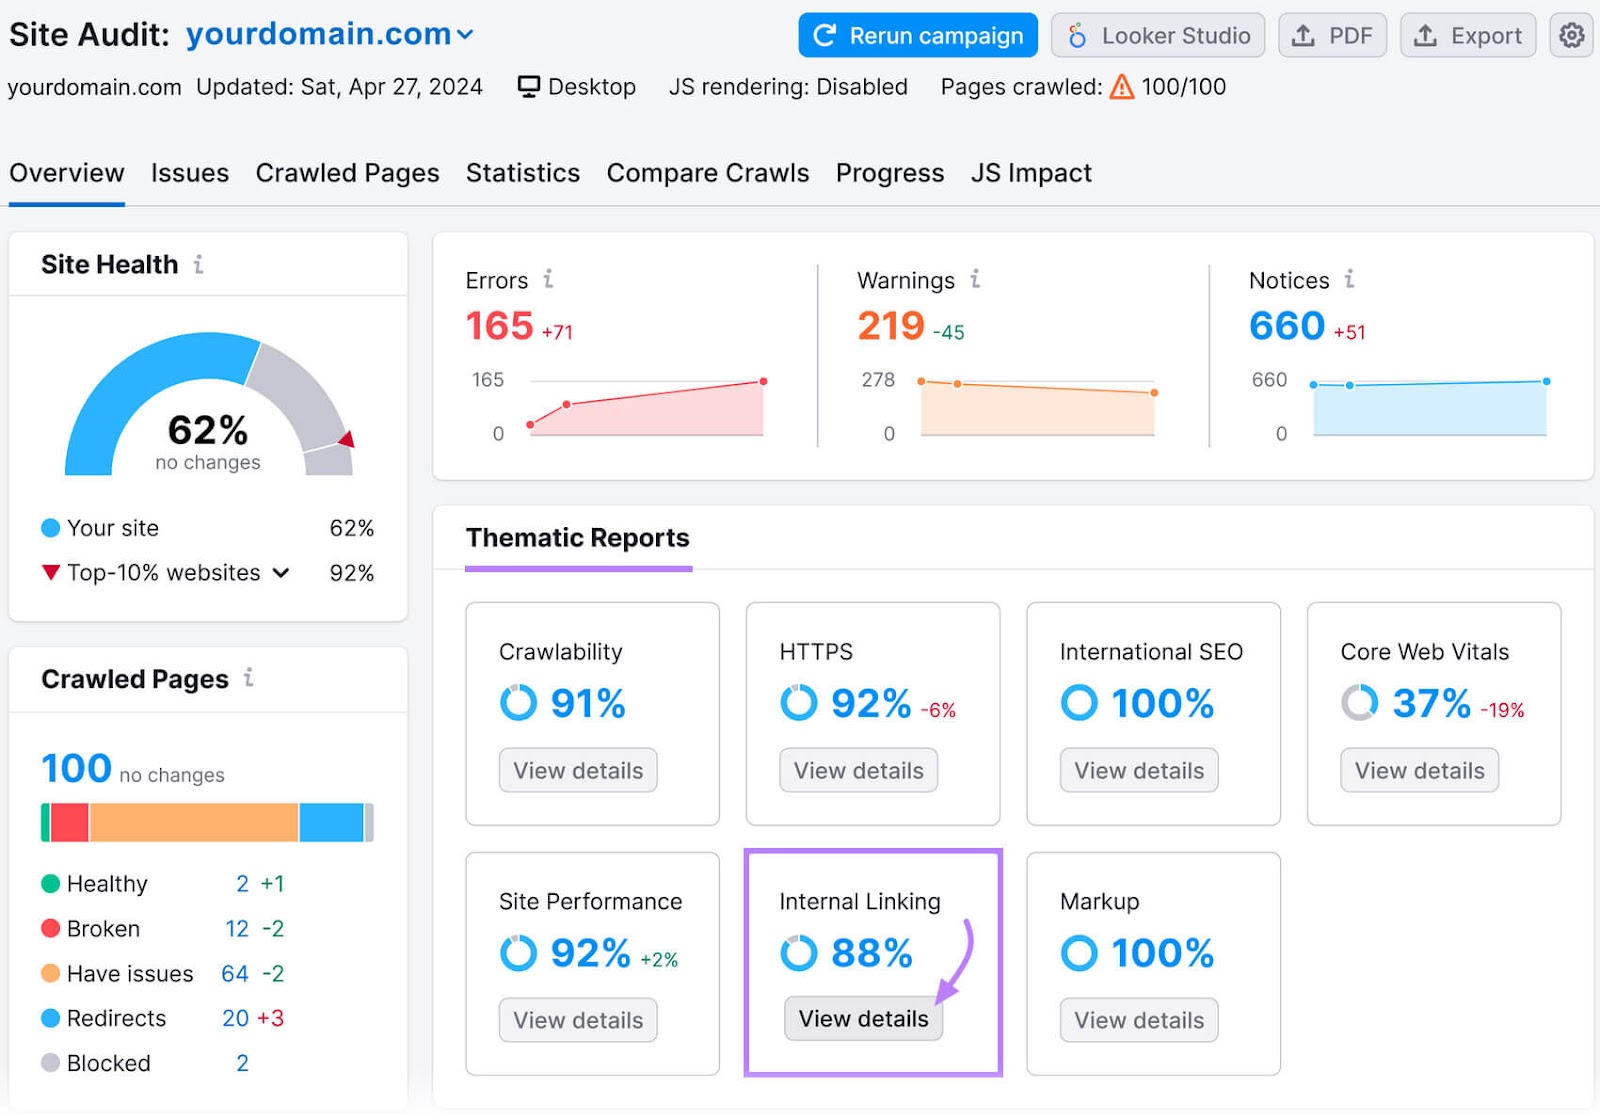 Site Audit dashboard showing the "Thematic Reports" section with the "Internal Linking" panel highlighted in purple.